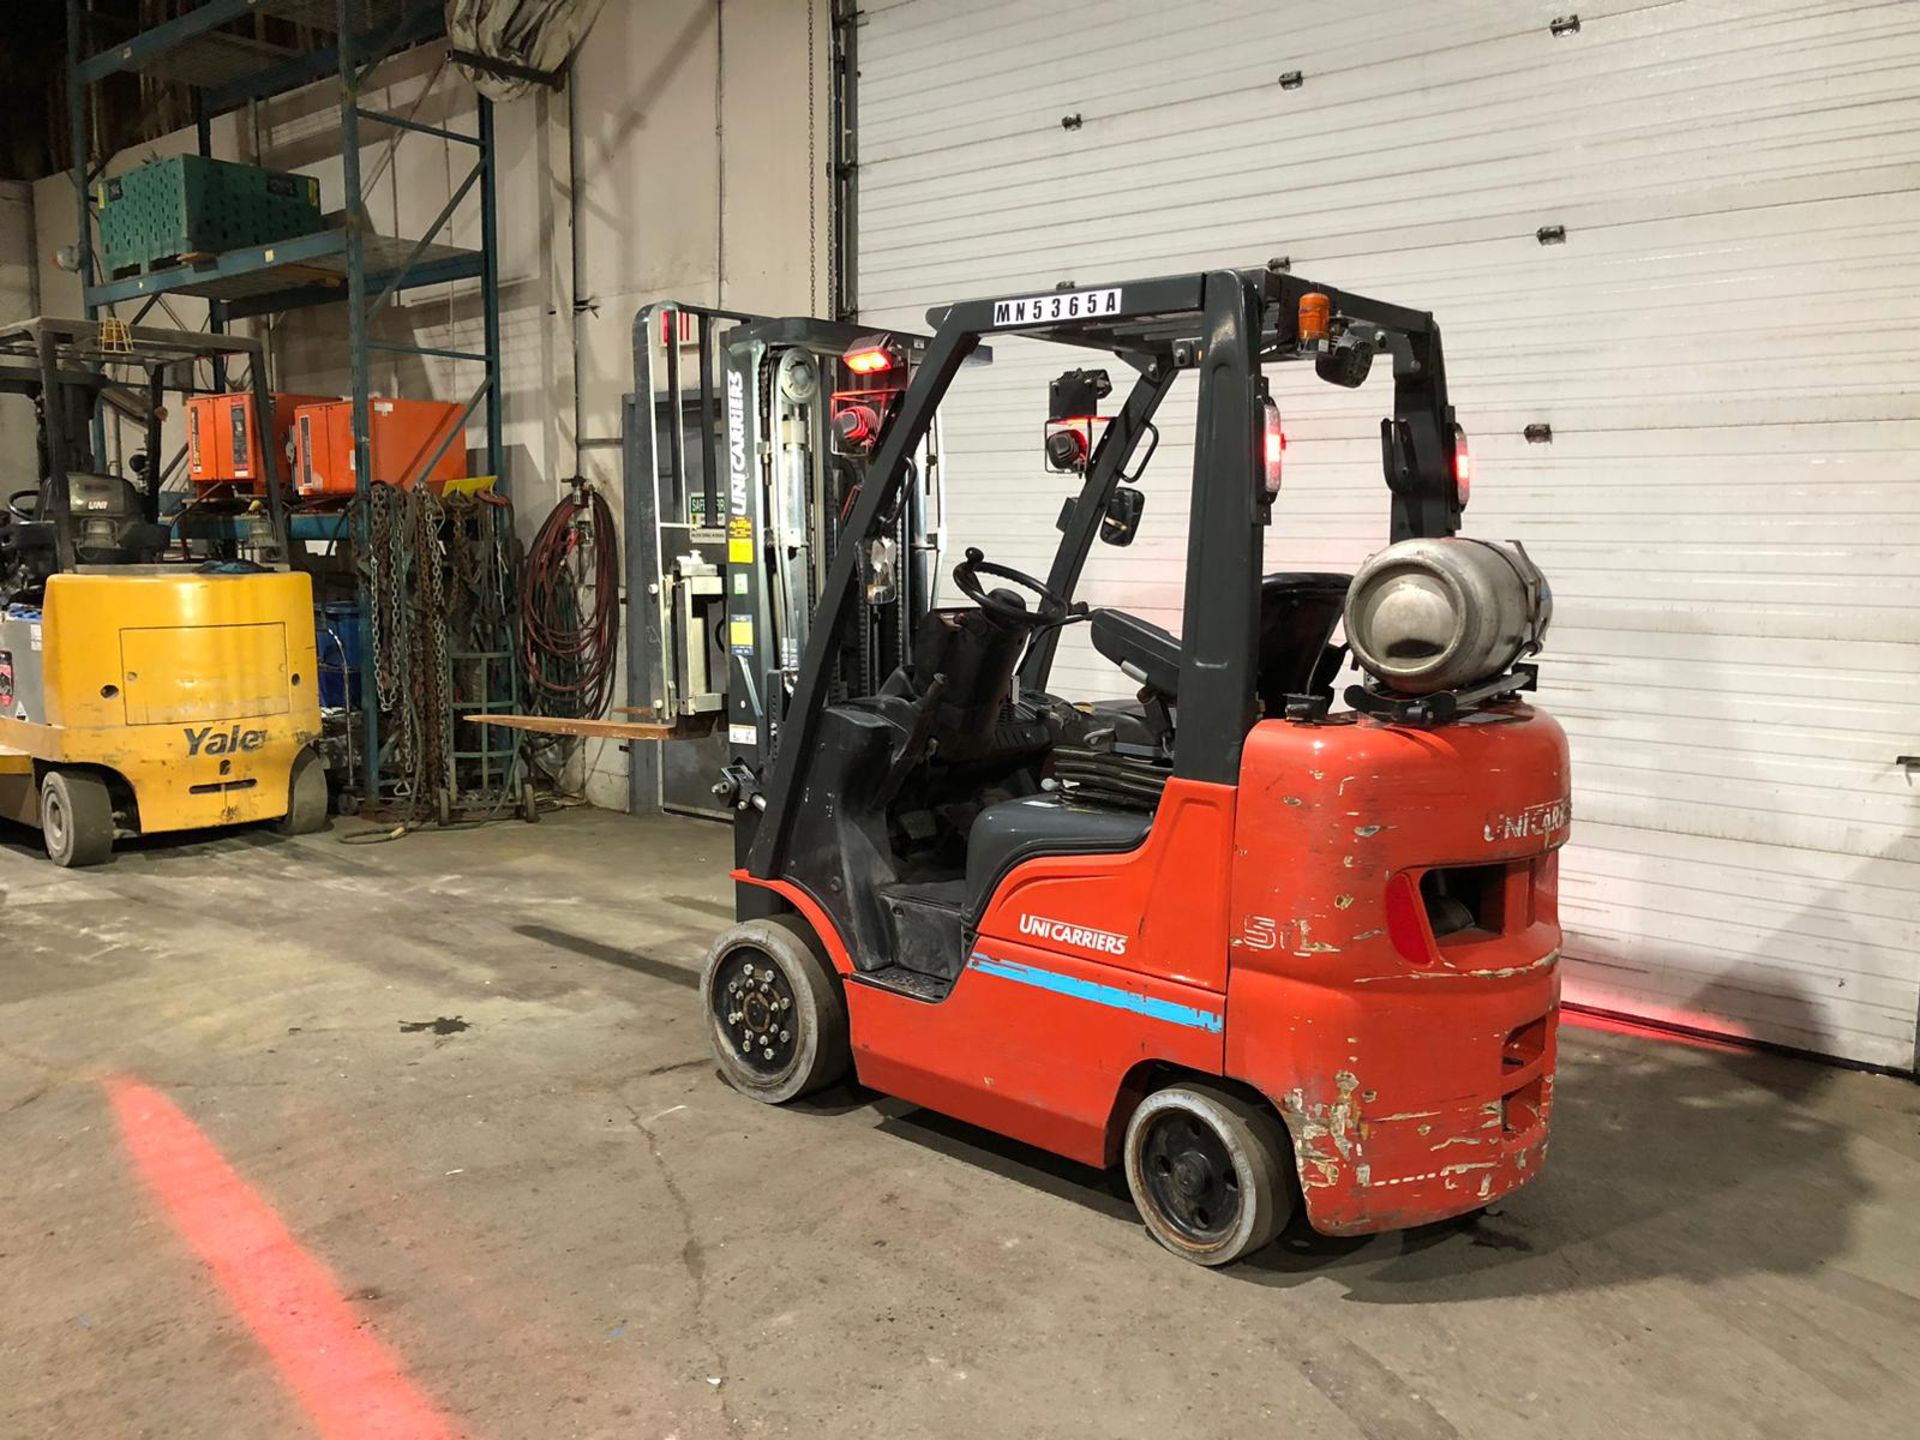 2020 Nissan Unicarrier 5,000lbs Capacity Forklift LPG (propane) WITH VERY LOW HOURS & Sideshift & - Image 4 of 5